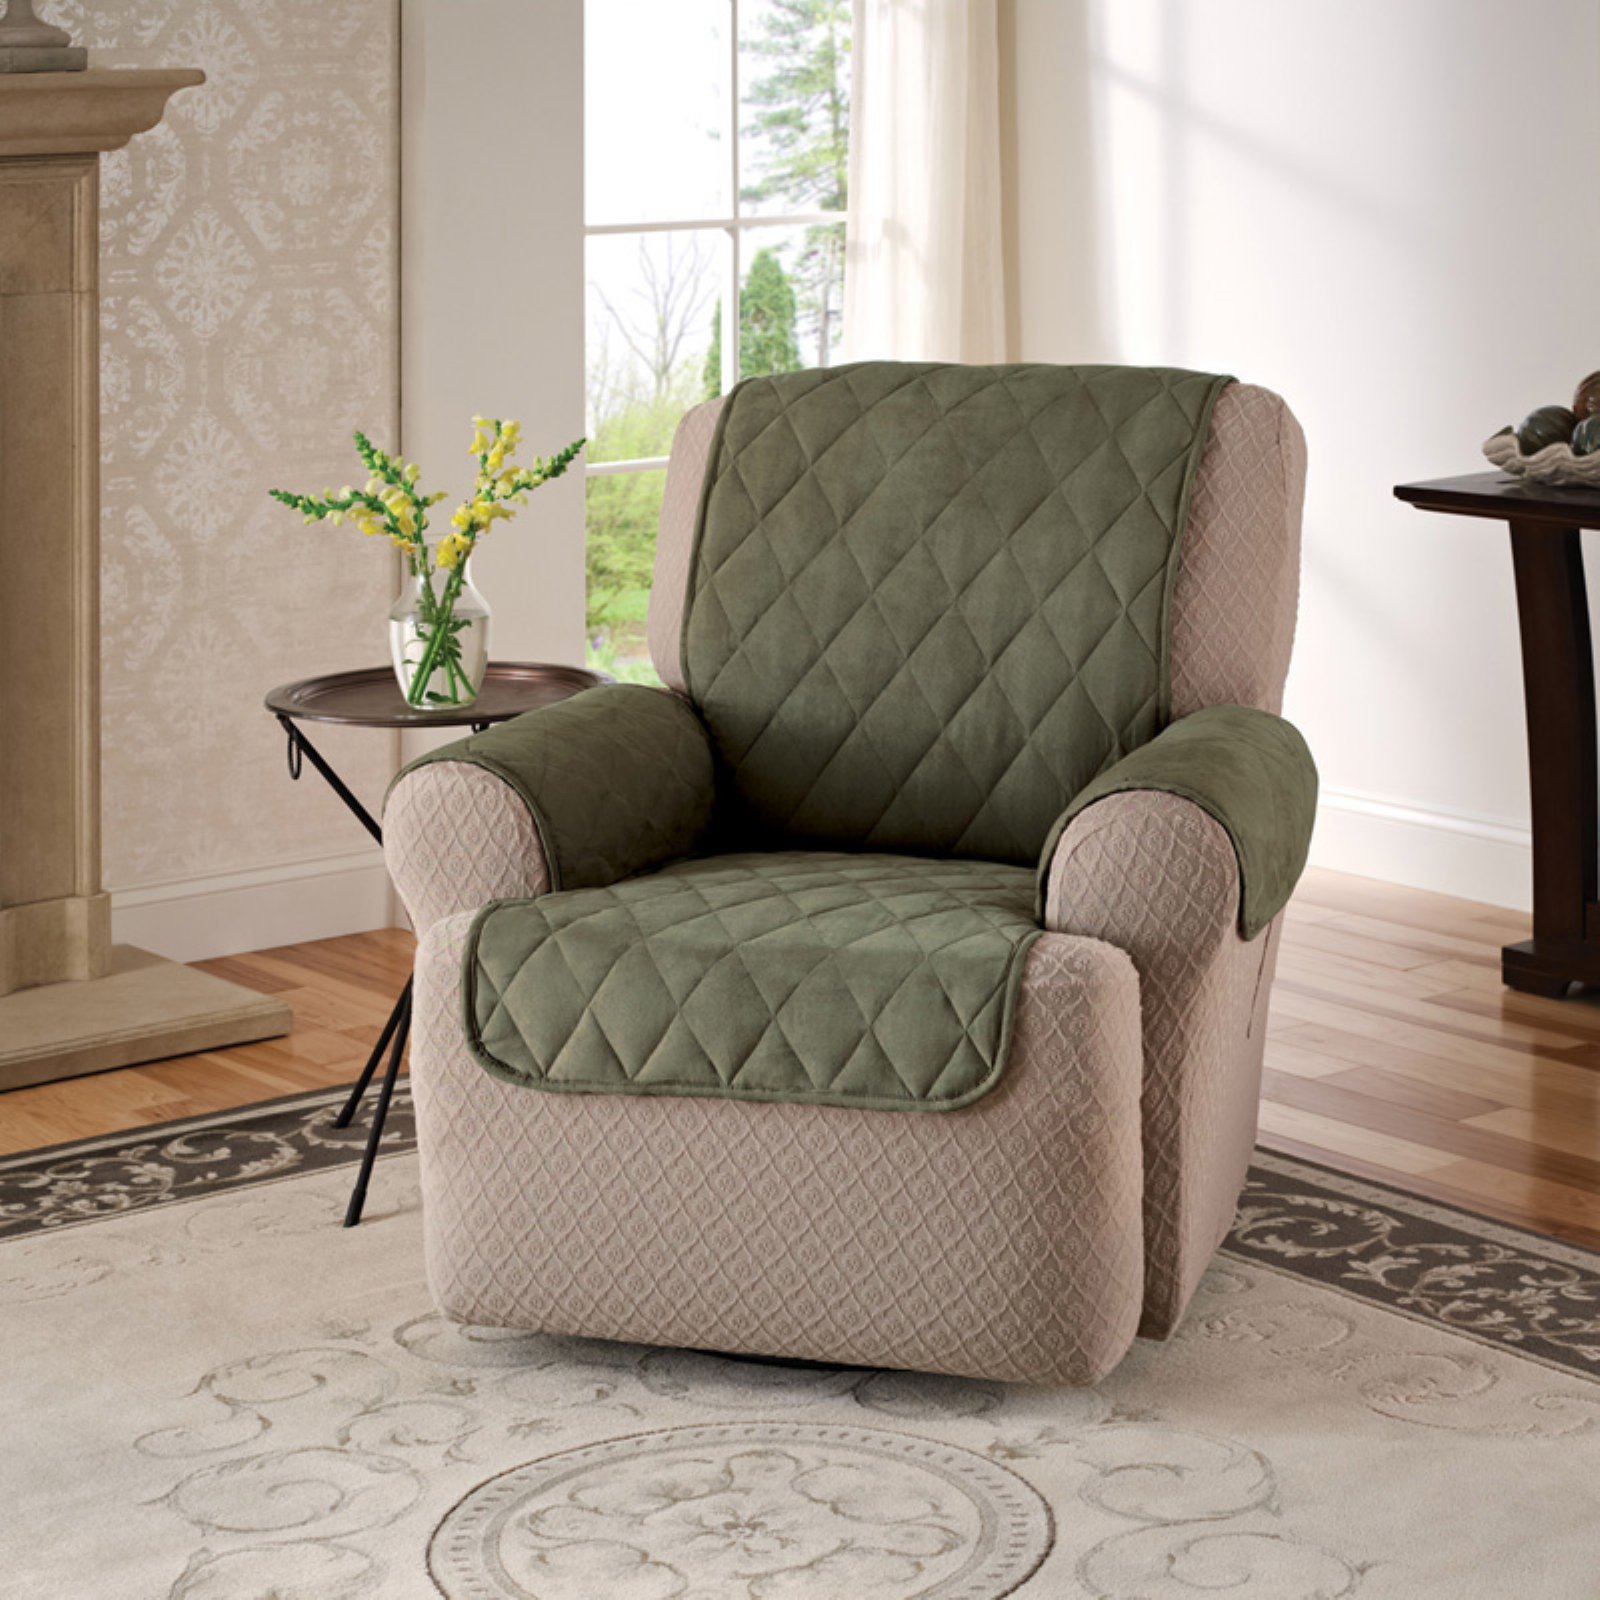 Innovative Textile Solutions 1-Piece Faux Suede Recliner/Wing Chair Furniture Cover Slipcover, Grey - image 2 of 2